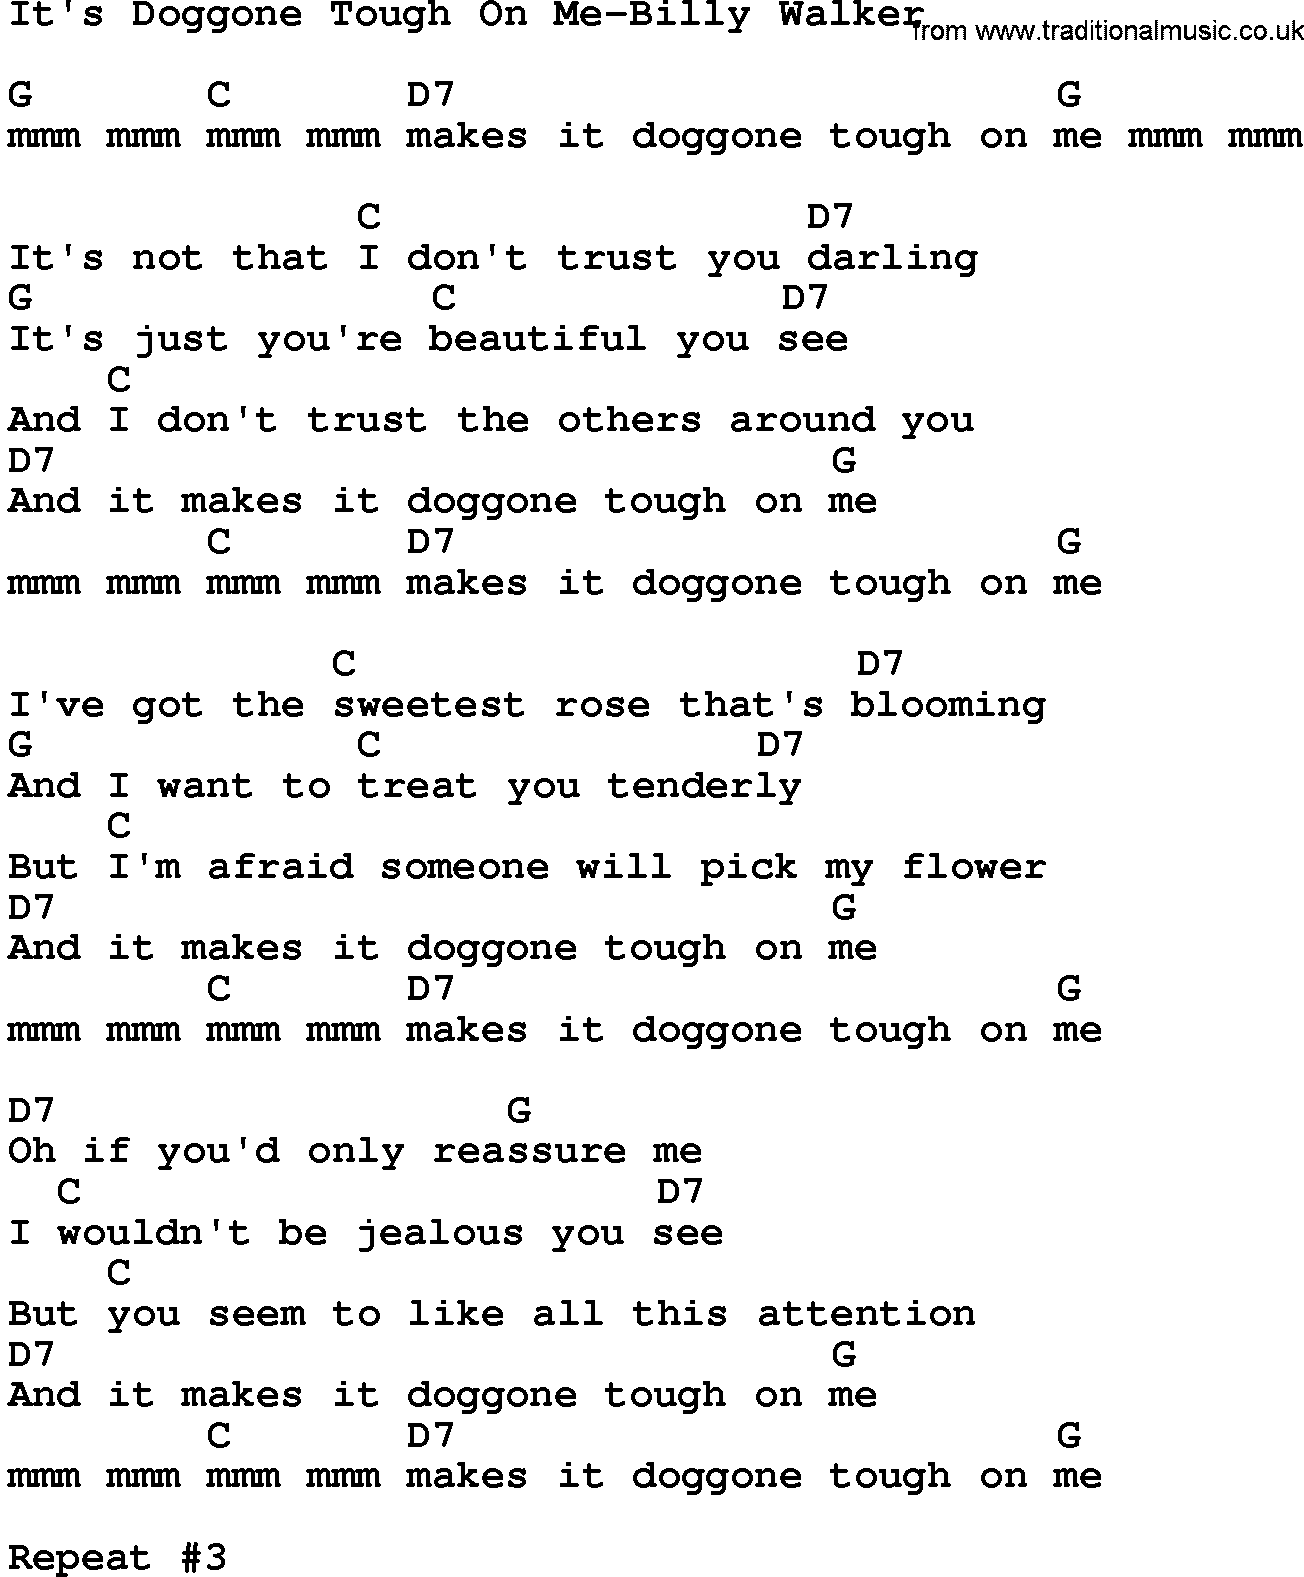 Country music song: It's Doggone Tough On Me-Billy Walker lyrics and chords